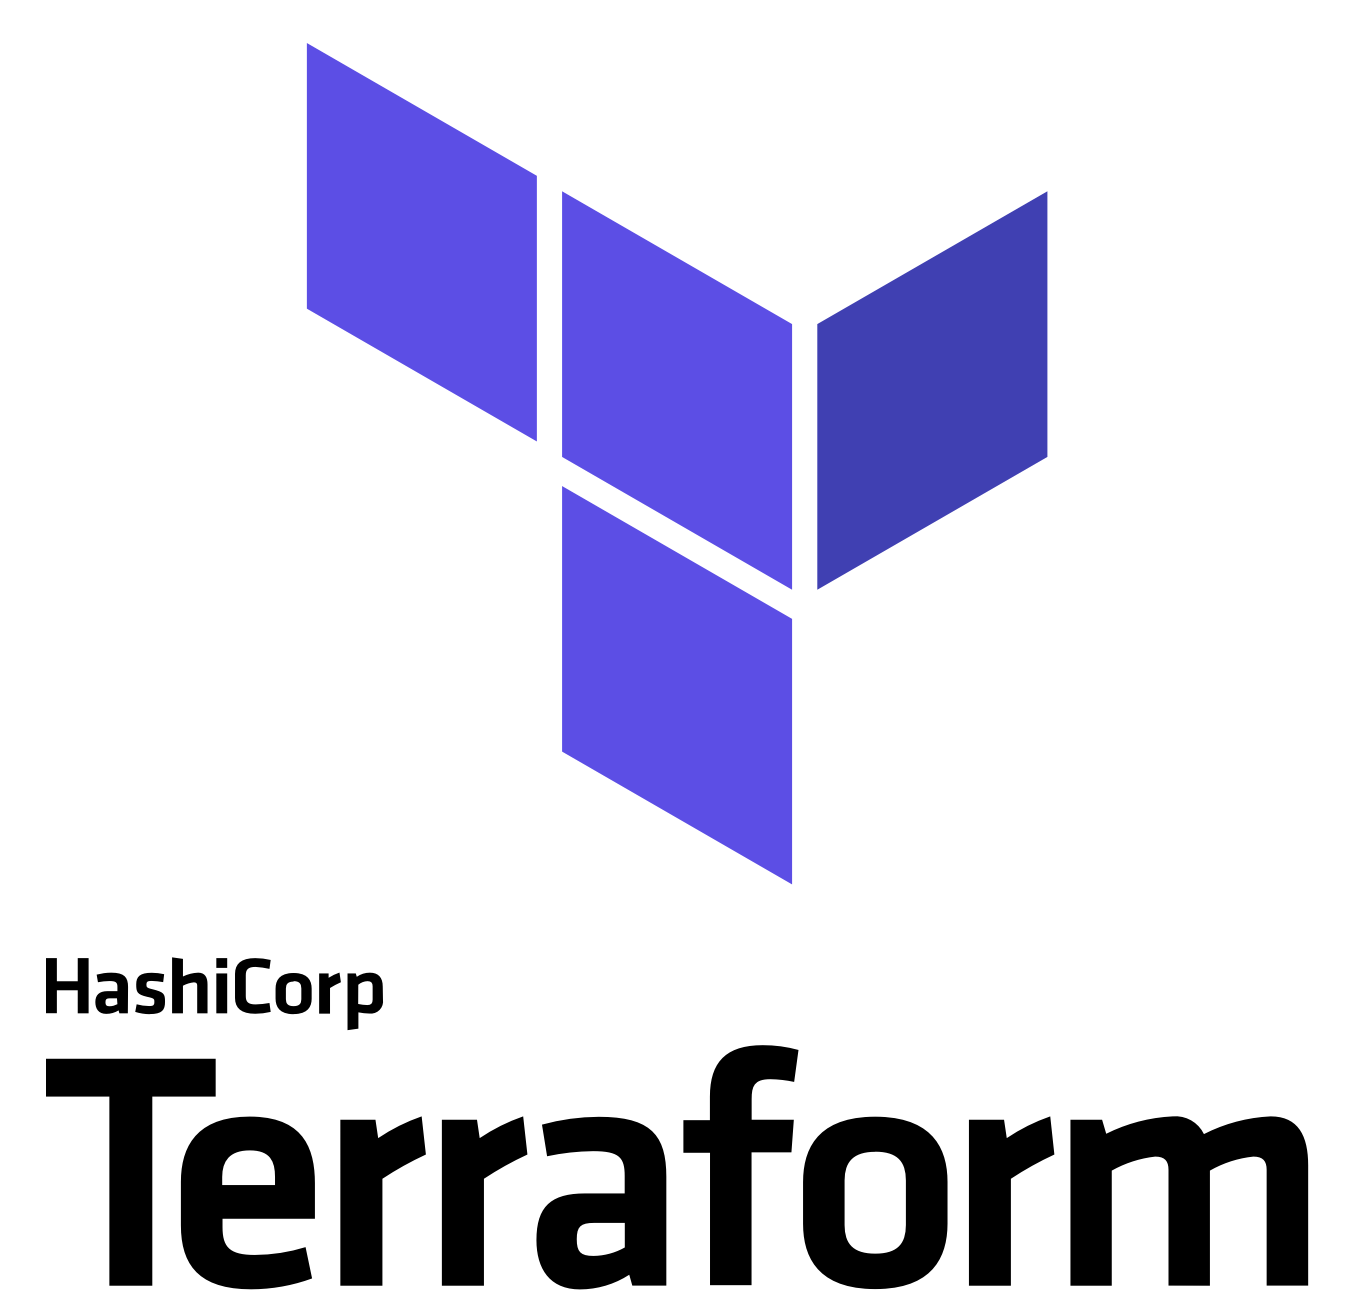 Logo of Terraform with Capital T formed by violet parallelograms and Hashi Terraform written below it